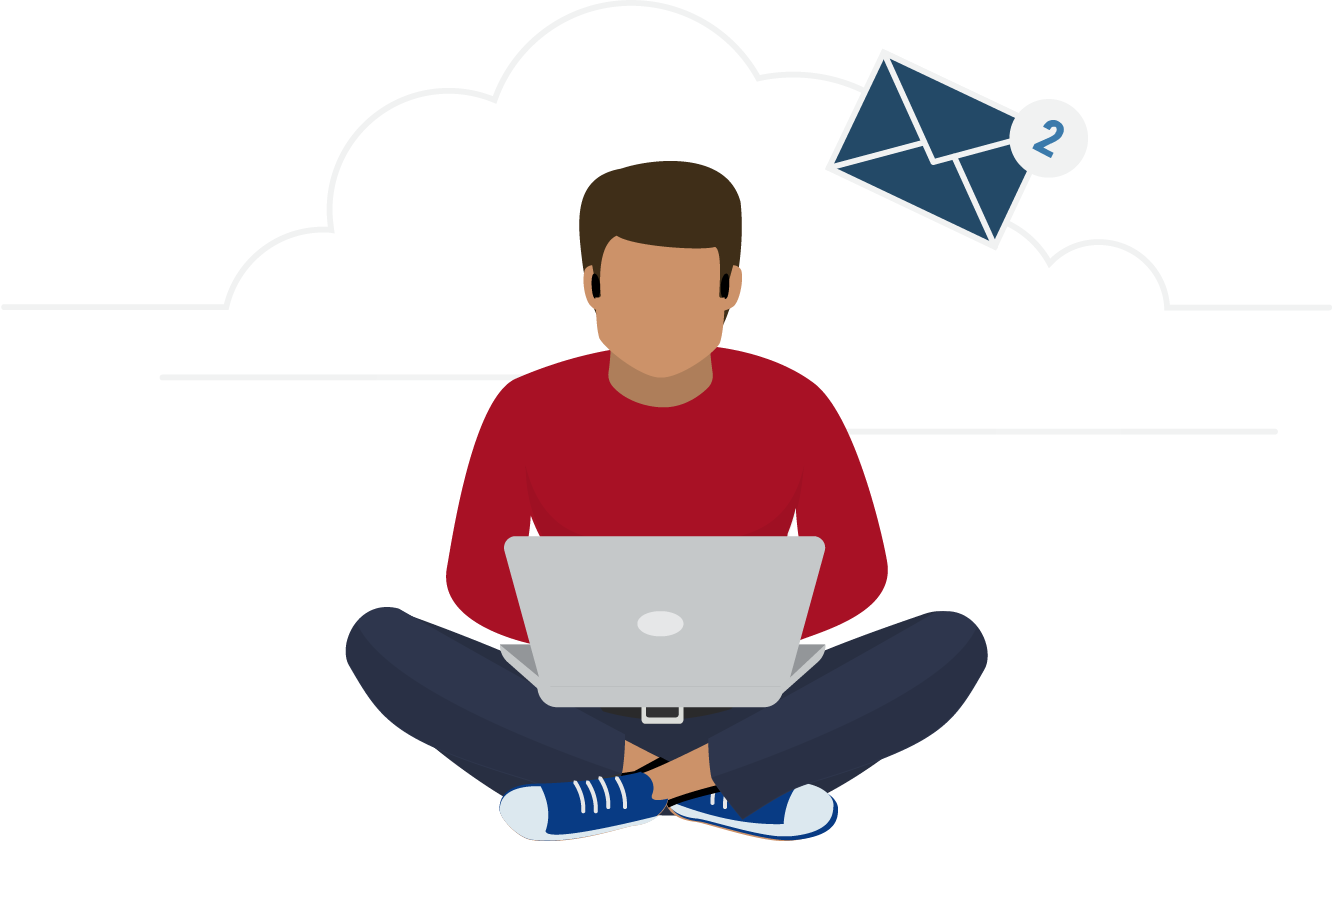 Why ReachMail?